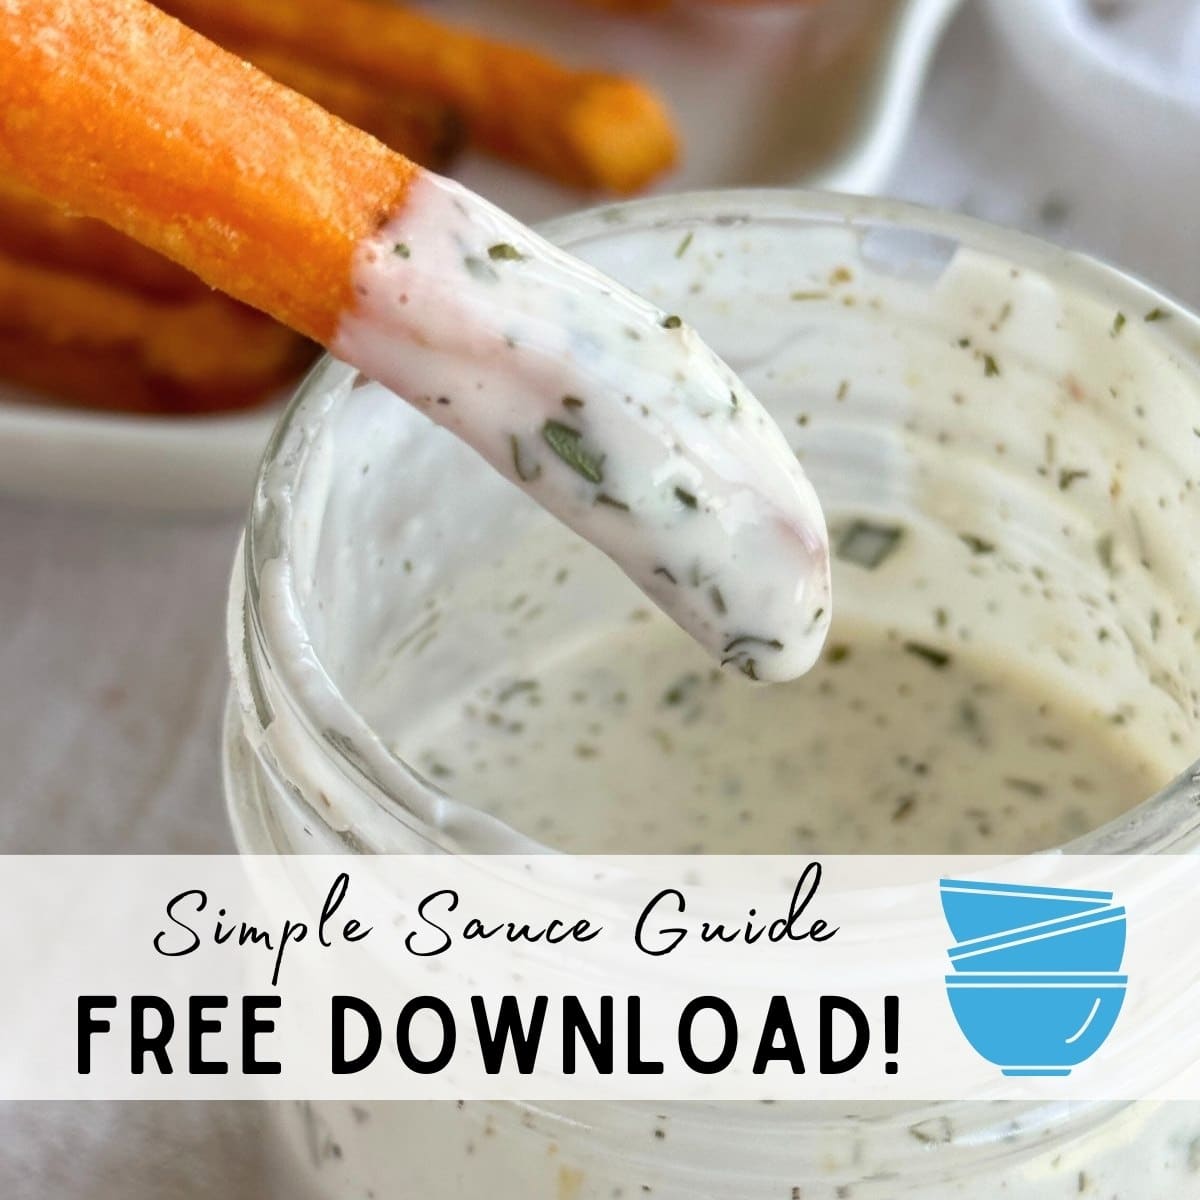 Sweet potato fry dipped in vegan ranch dressing with a glass jar filling with ranch dressing in the background. Text reads "Simple Snack Guide" in cursive lettering and "FREE DOWNLOAD" in block lettering. Alternative Dish logo is to the side of the text: 3 stacked blue bowls graphic.